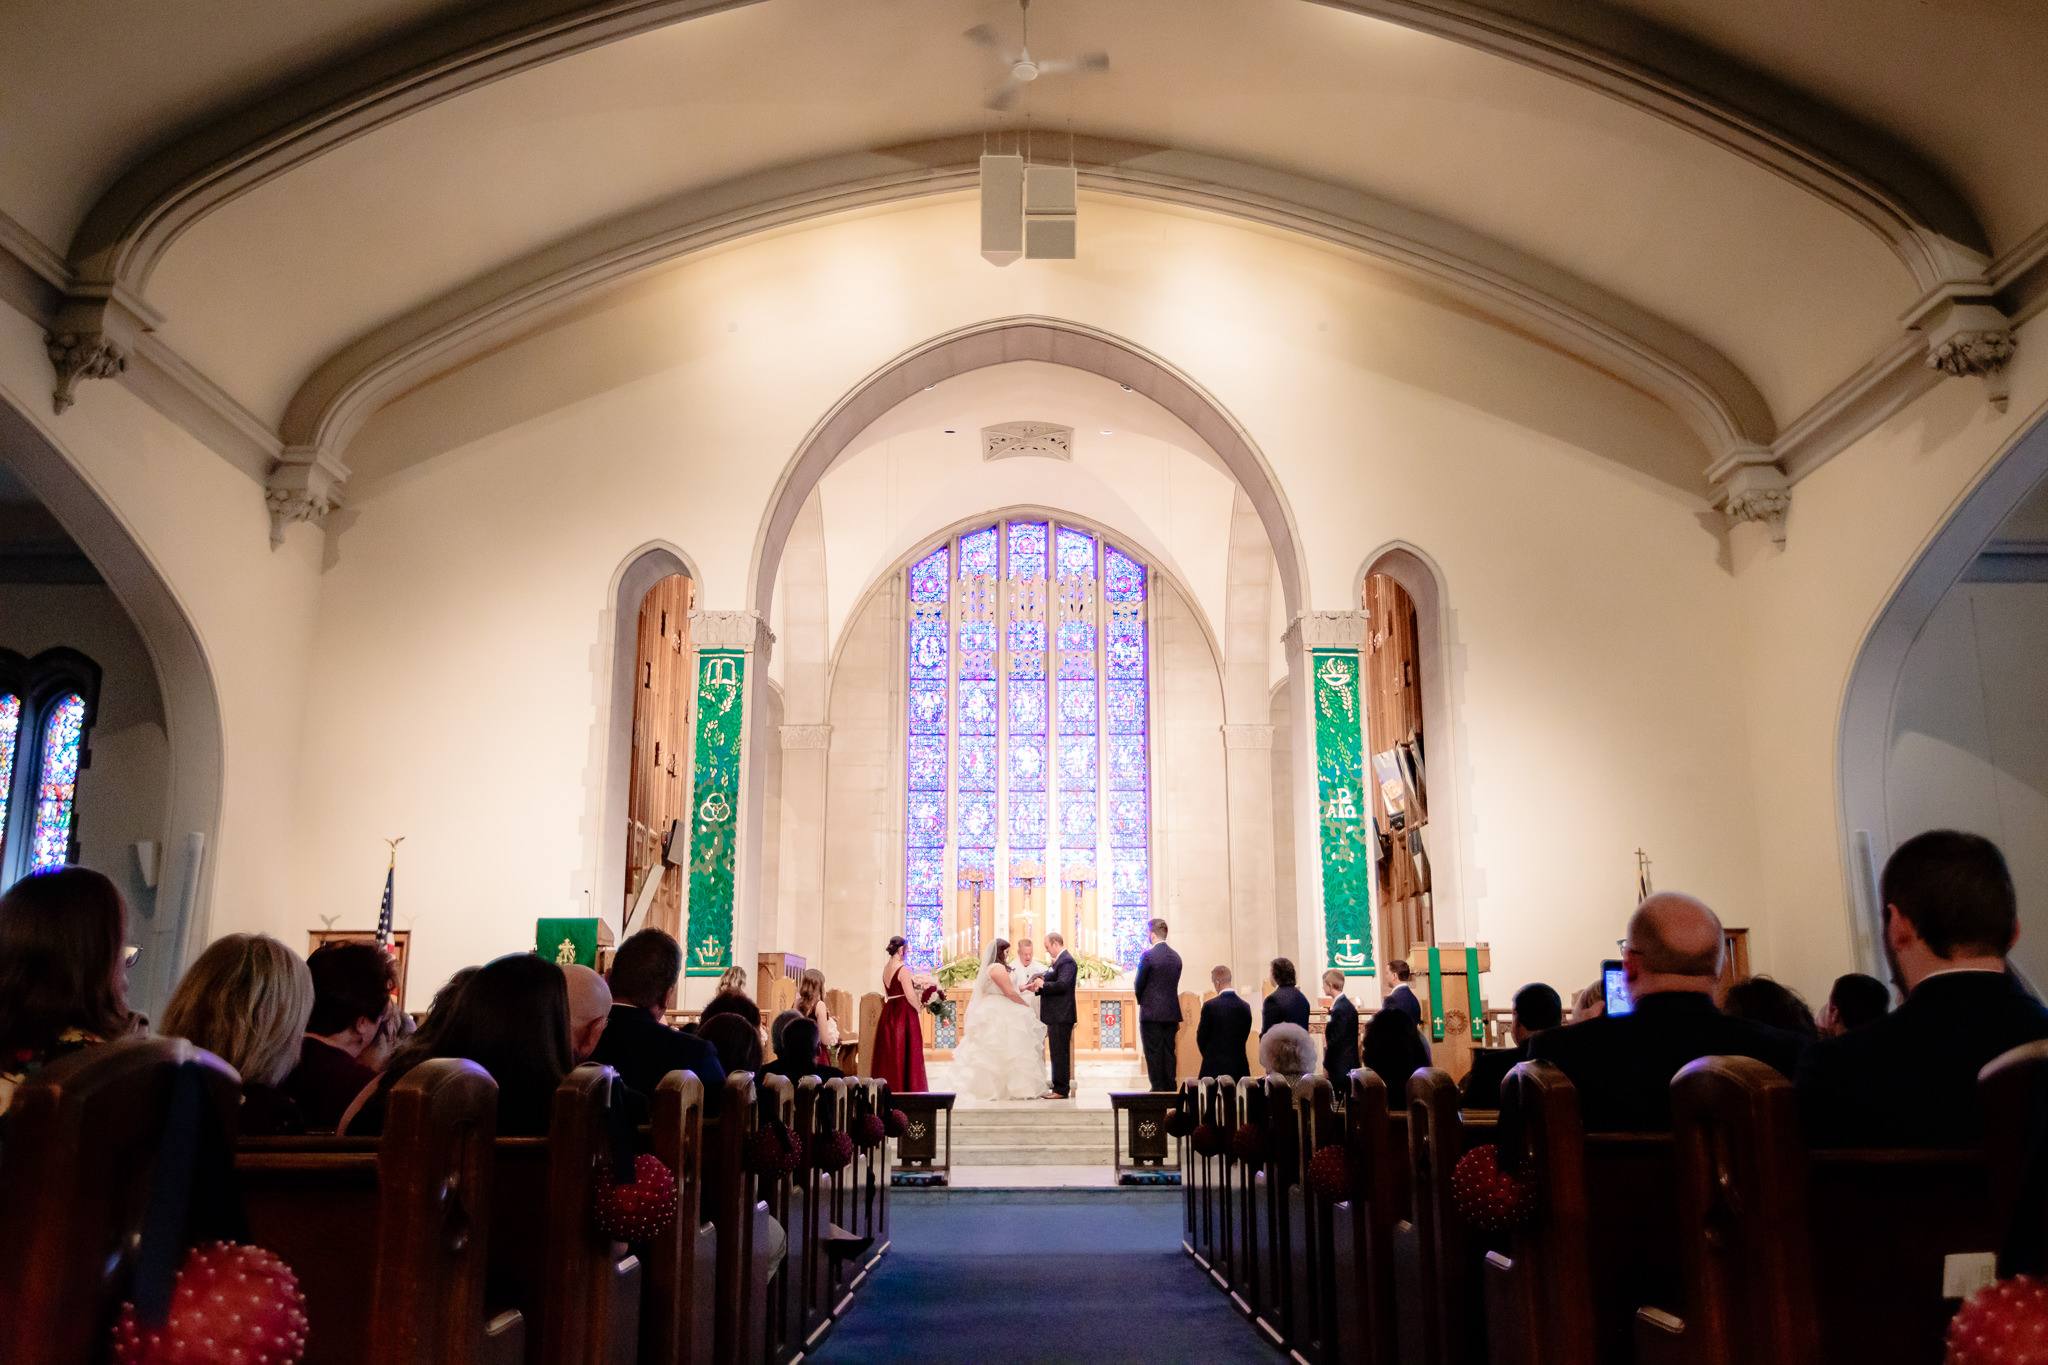 Stained glass windows behind the bride and groom at Mt. Lebanon United Methodist Church